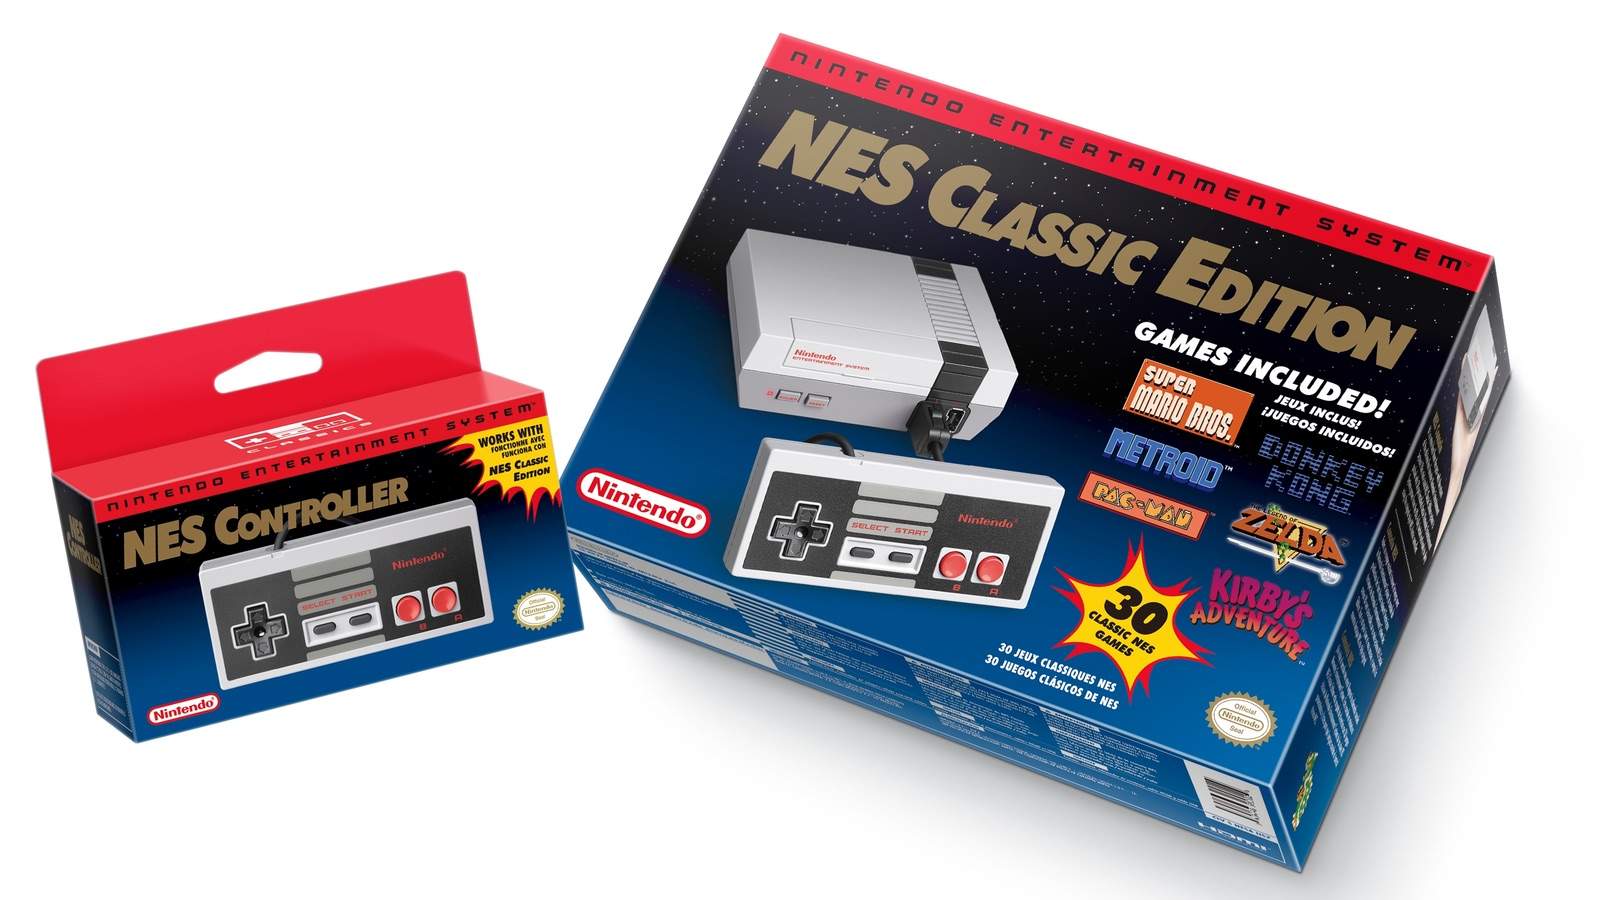 Vamers - FYI - Gaming - Gadgetology - Details and Price of Nintendo's NES Classic Edition - Banner 01